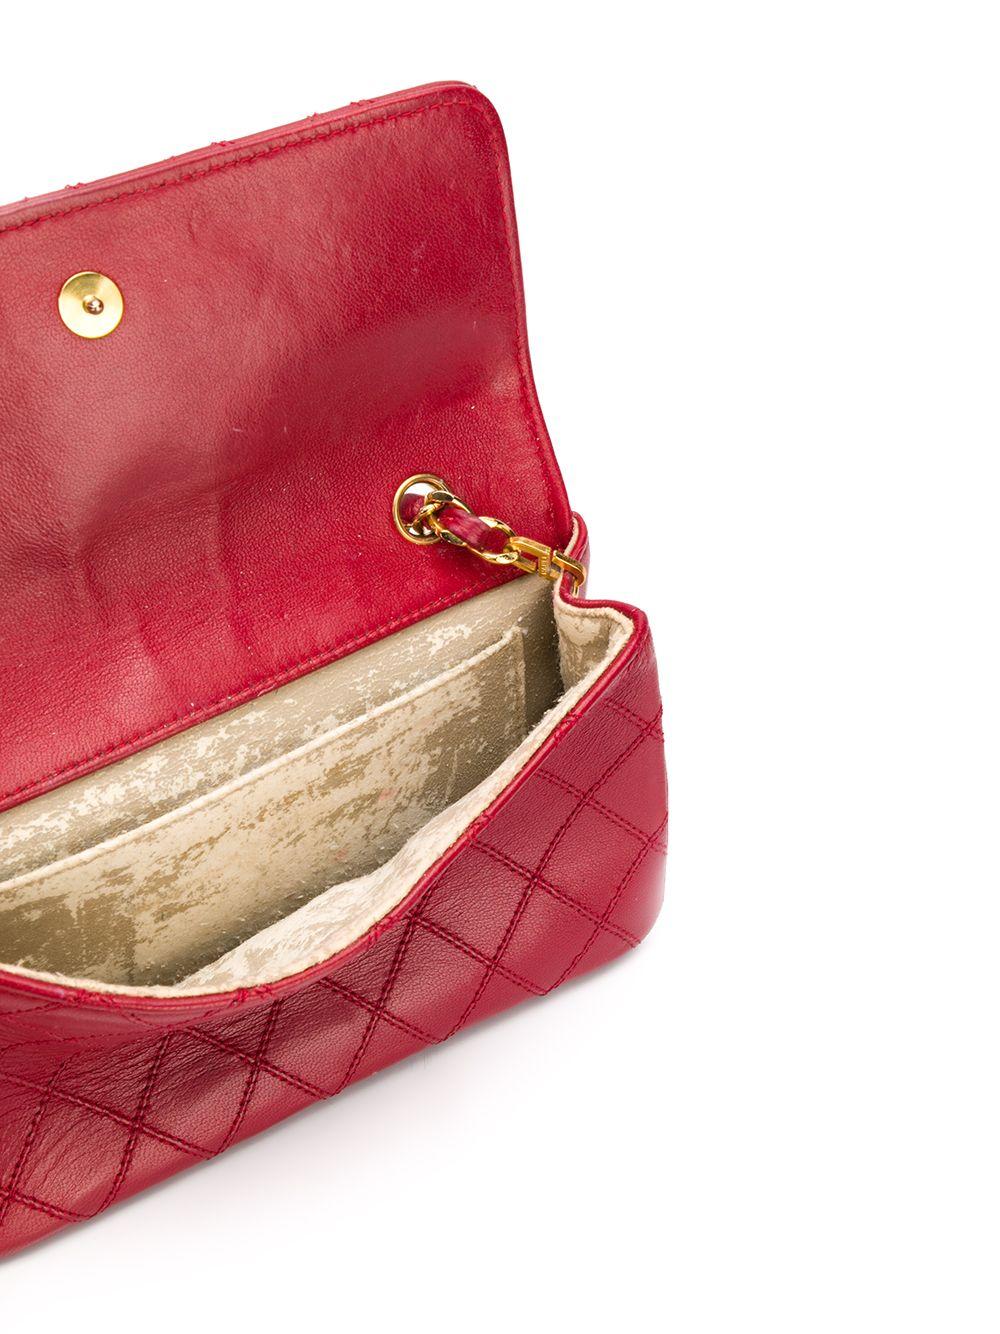 Chanel Red Leather CC Shoulder Bag In Excellent Condition In London, GB